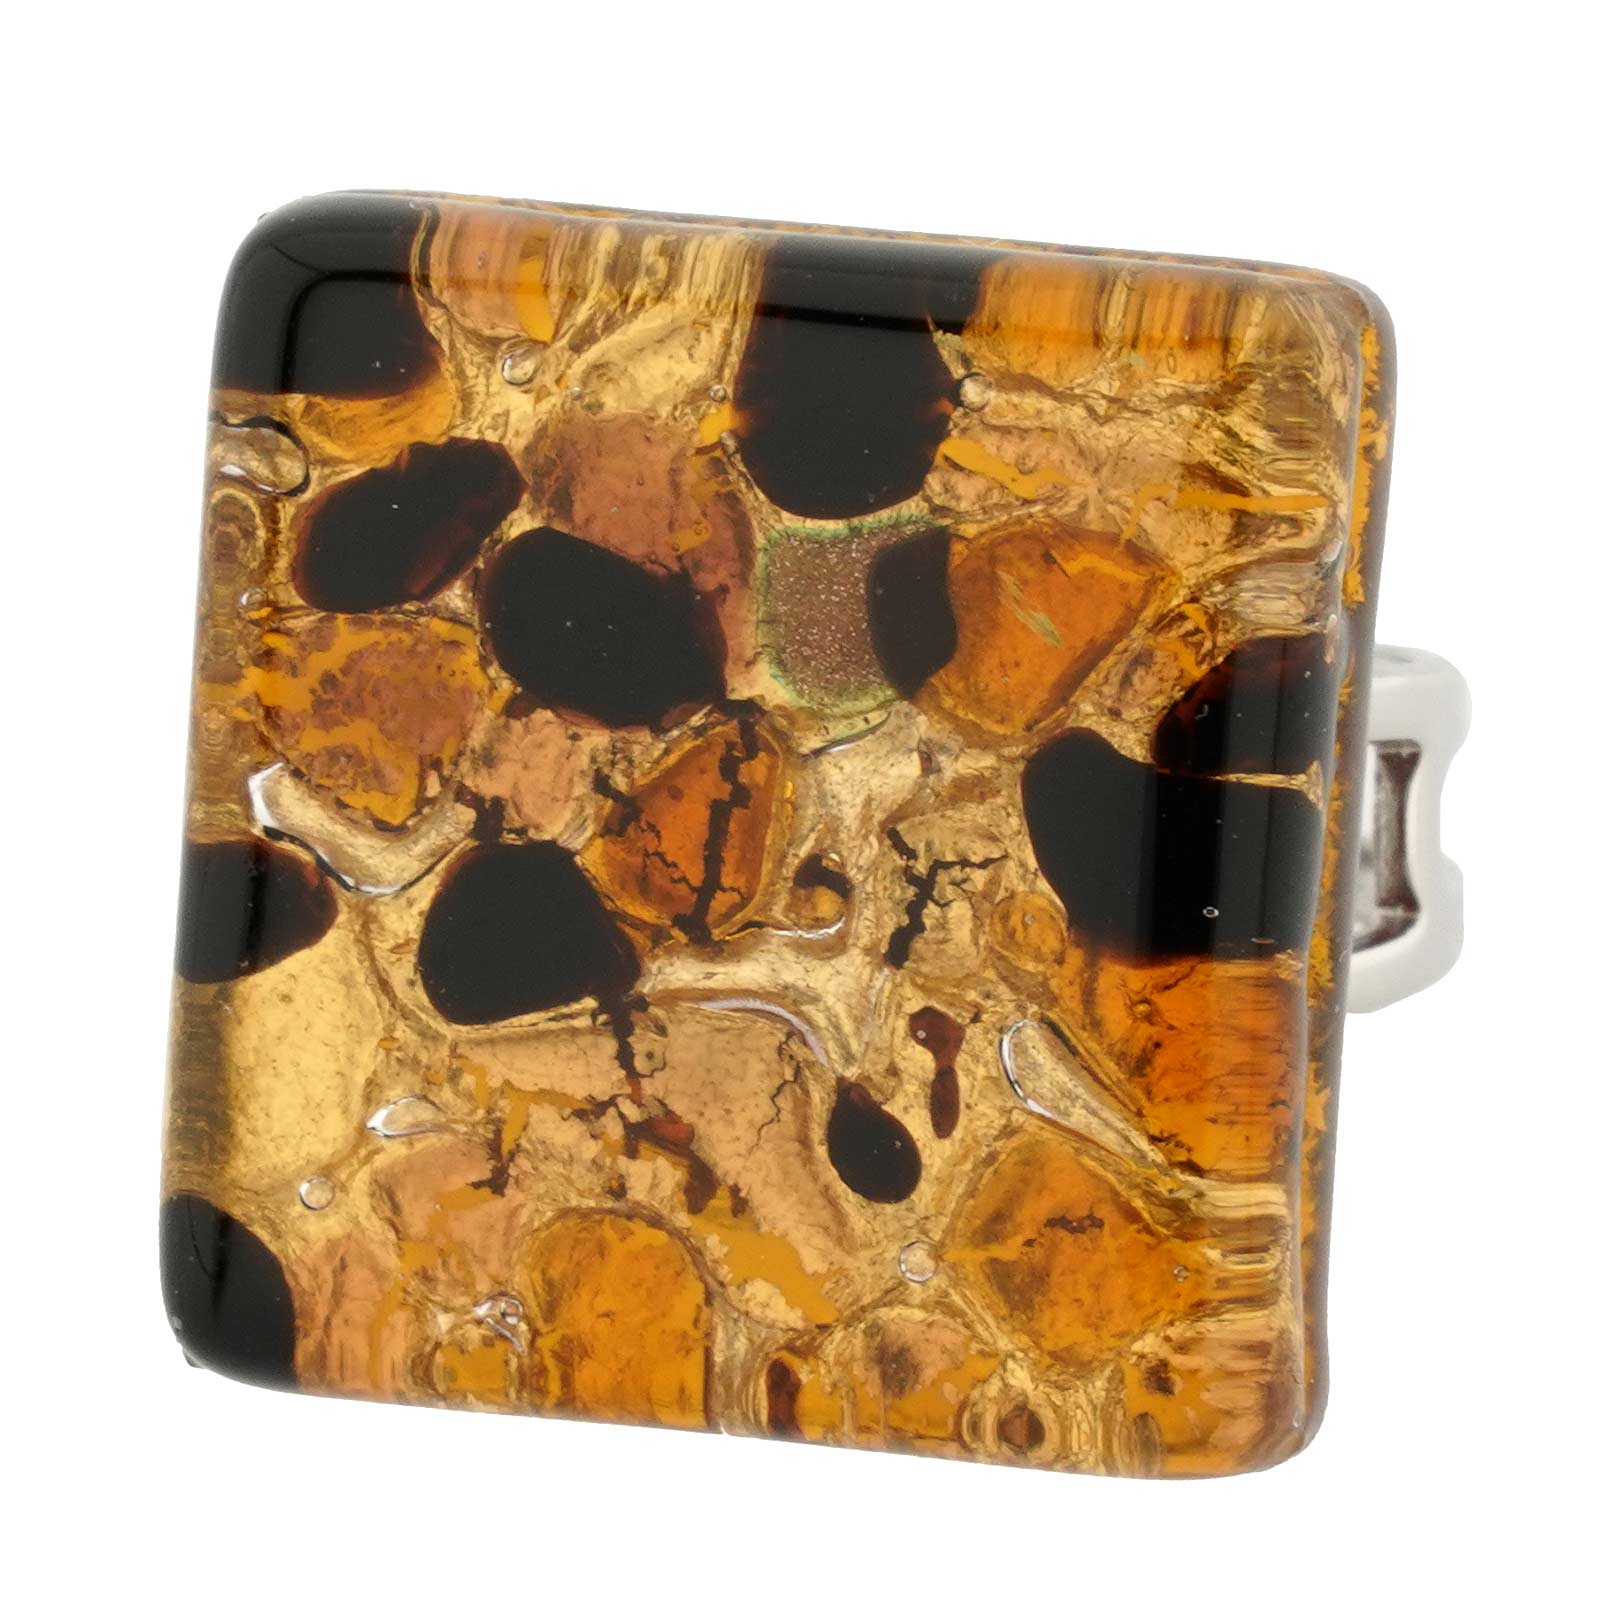 Venetian Reflections Square Adjustable Ring - Topaz Gold